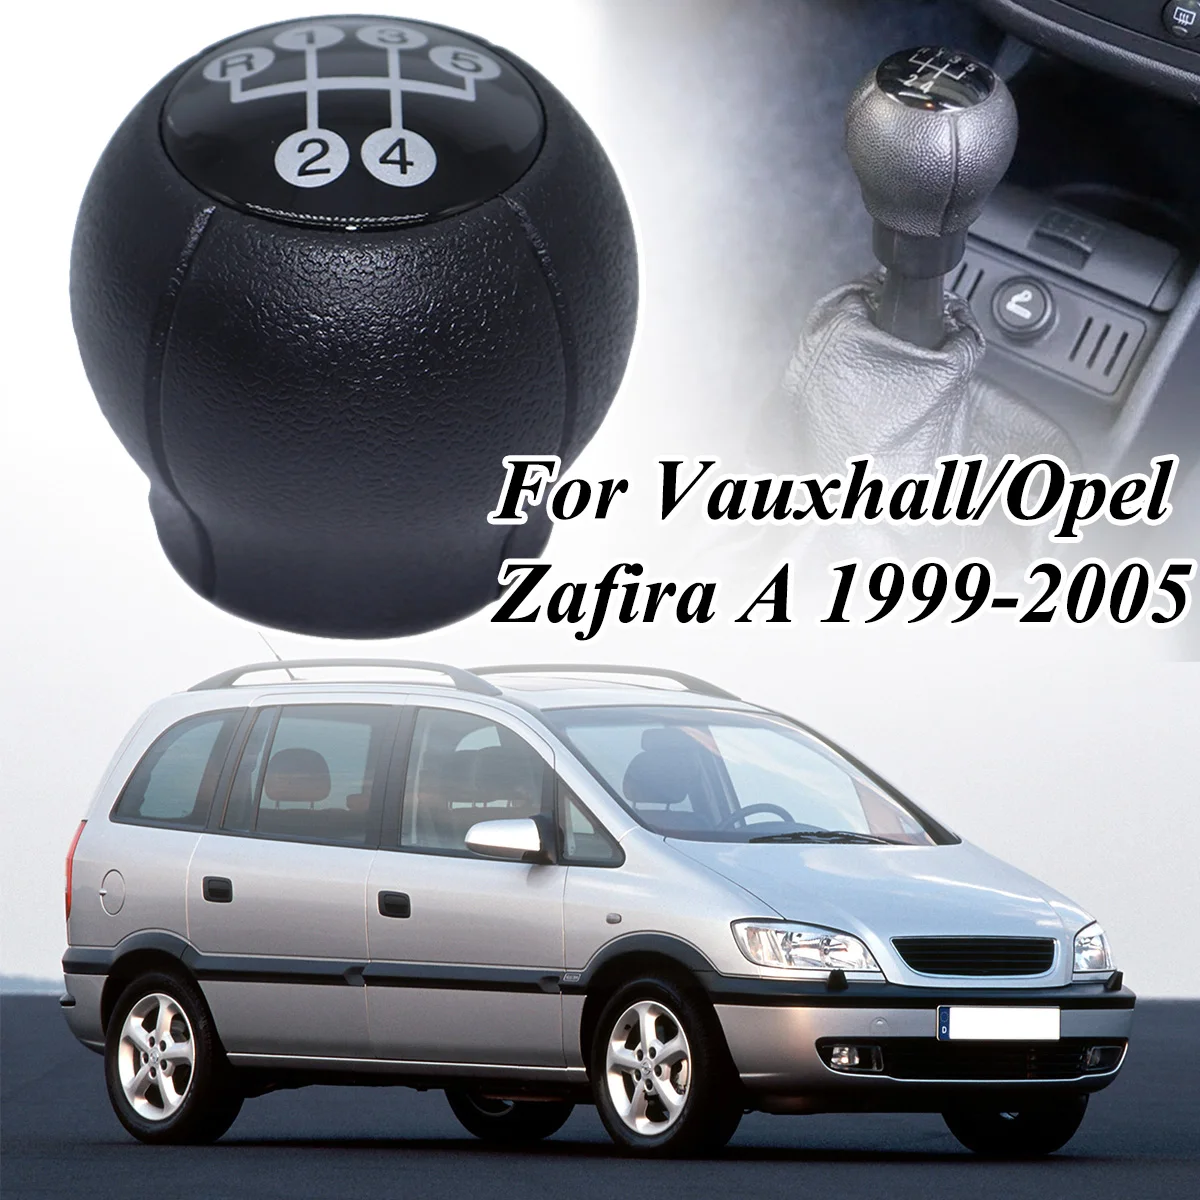 

Gear Shift Knob For Vauxhall Opel Zafira A 5Speed +R Manual Gearstick Lever Pen Handball Replacement Parts 1999 2001 2002 - 2005